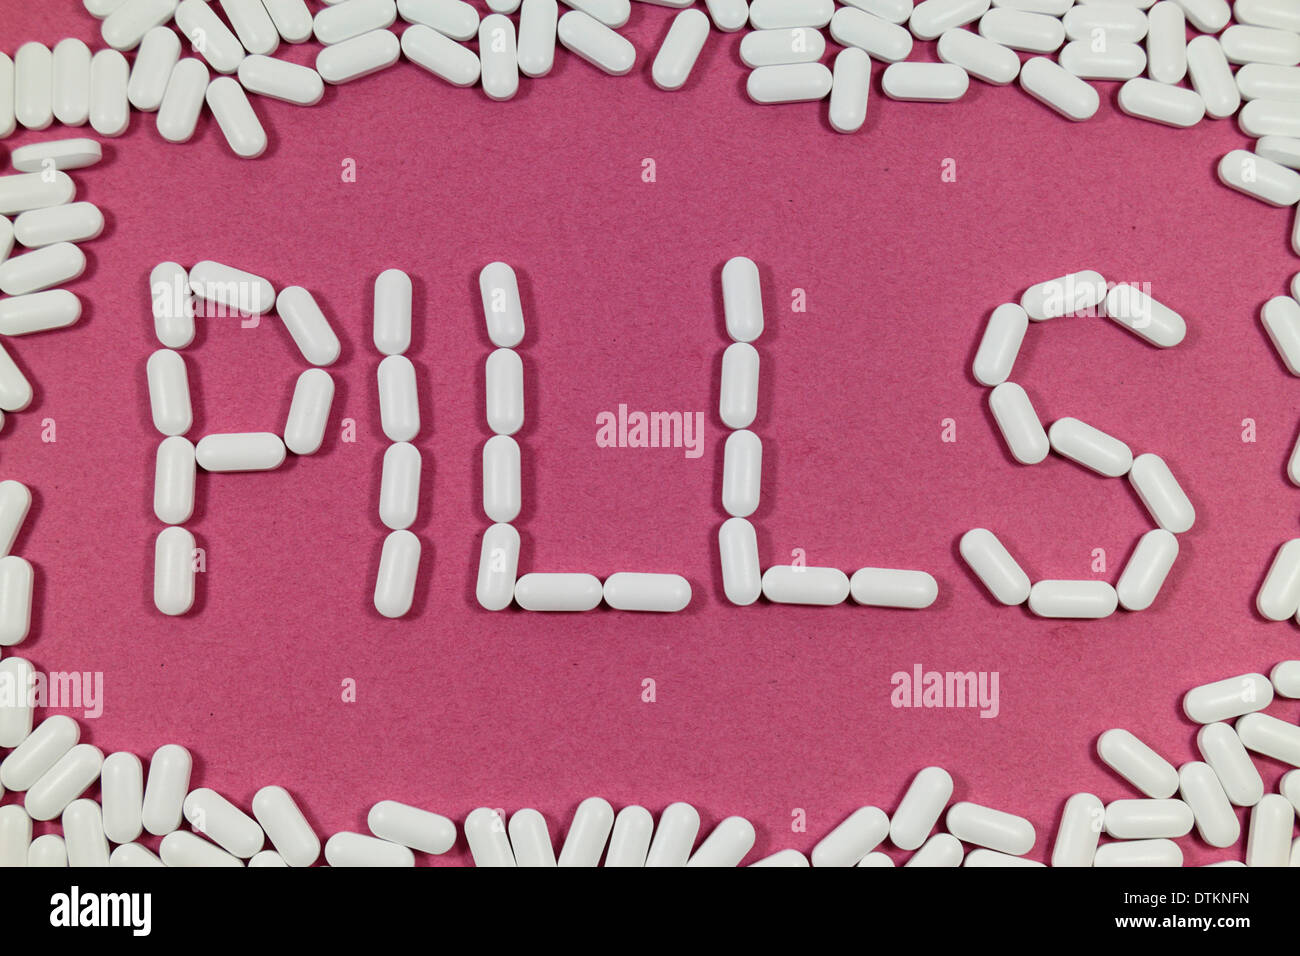 White pills on a red/pinks background spelling 'PILLS'. Stock Photo